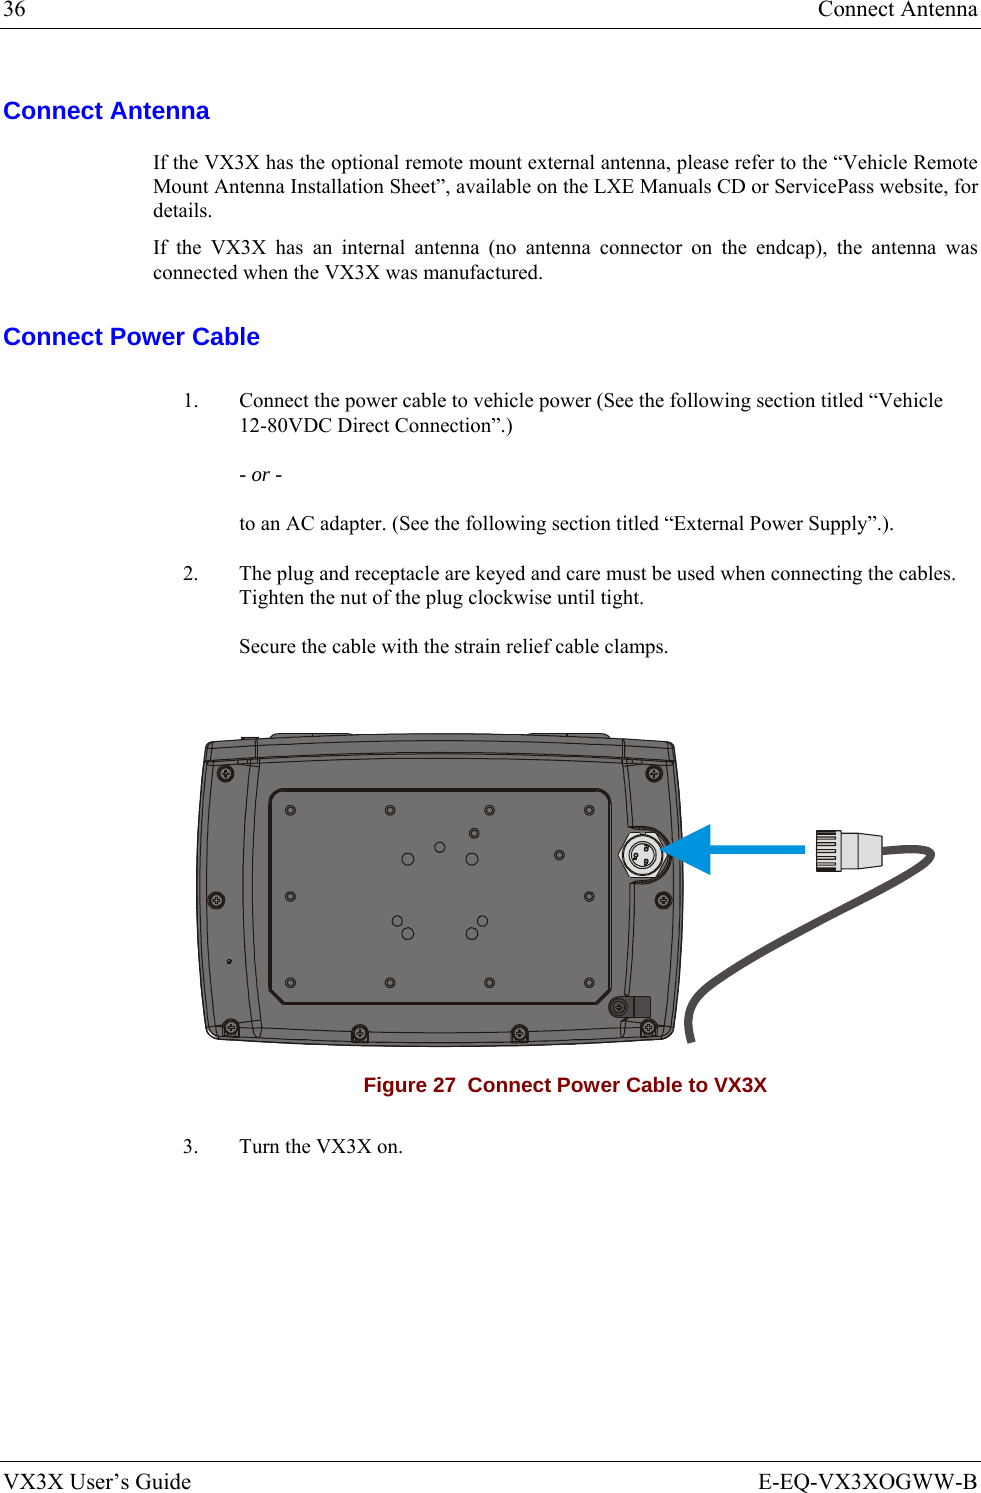 36  Connect Antenna VX3X User’s Guide  E-EQ-VX3XOGWW-B Connect Antenna If the VX3X has the optional remote mount external antenna, please refer to the “Vehicle Remote Mount Antenna Installation Sheet”, available on the LXE Manuals CD or ServicePass website, for details. If the VX3X has an internal antenna (no antenna connector on the endcap), the antenna was connected when the VX3X was manufactured. Connect Power Cable 1.  Connect the power cable to vehicle power (See the following section titled “Vehicle 12-80VDC Direct Connection”.) - or - to an AC adapter. (See the following section titled “External Power Supply”.). 2.  The plug and receptacle are keyed and care must be used when connecting the cables. Tighten the nut of the plug clockwise until tight. Secure the cable with the strain relief cable clamps.   Figure 27  Connect Power Cable to VX3X 3.  Turn the VX3X on.   